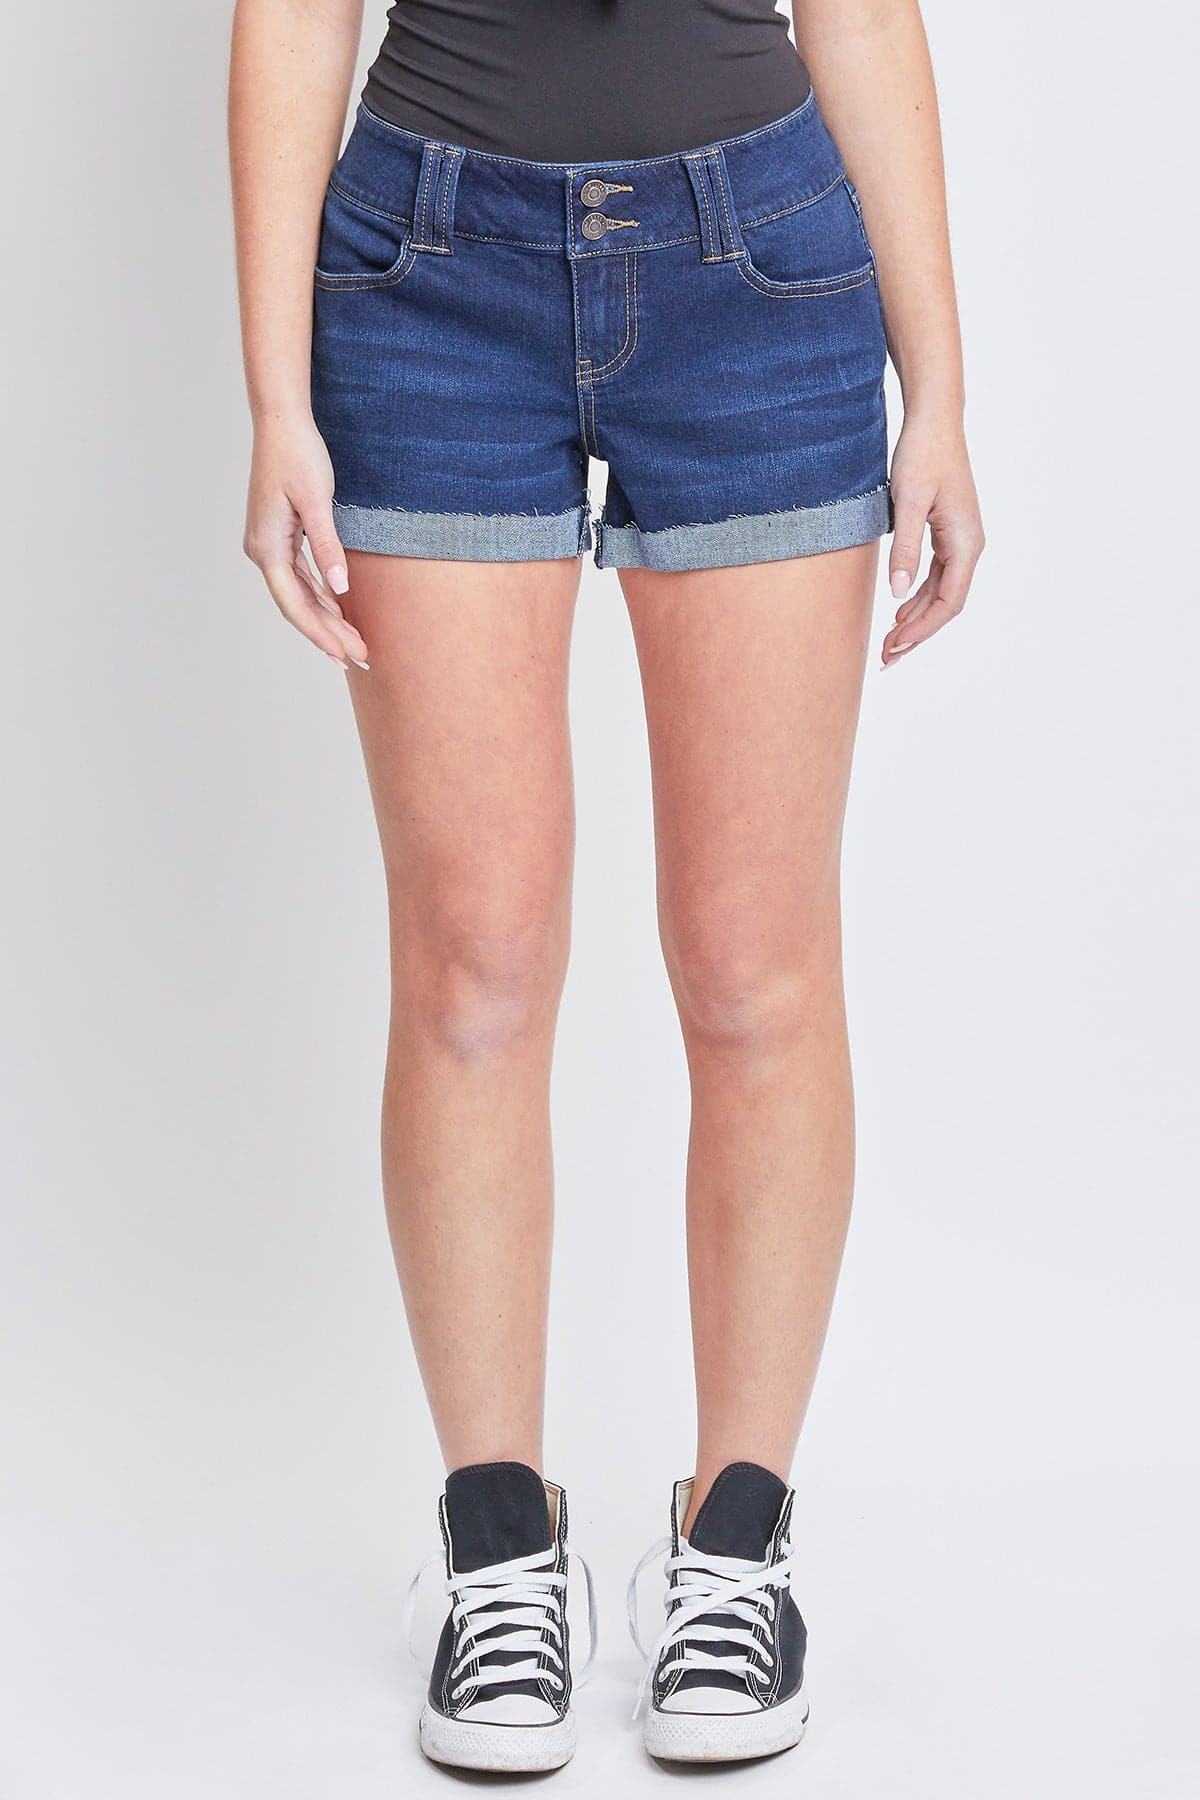 Women's  2-Button Denim Shorts with Flap Back Pockets and Cuffed Hems